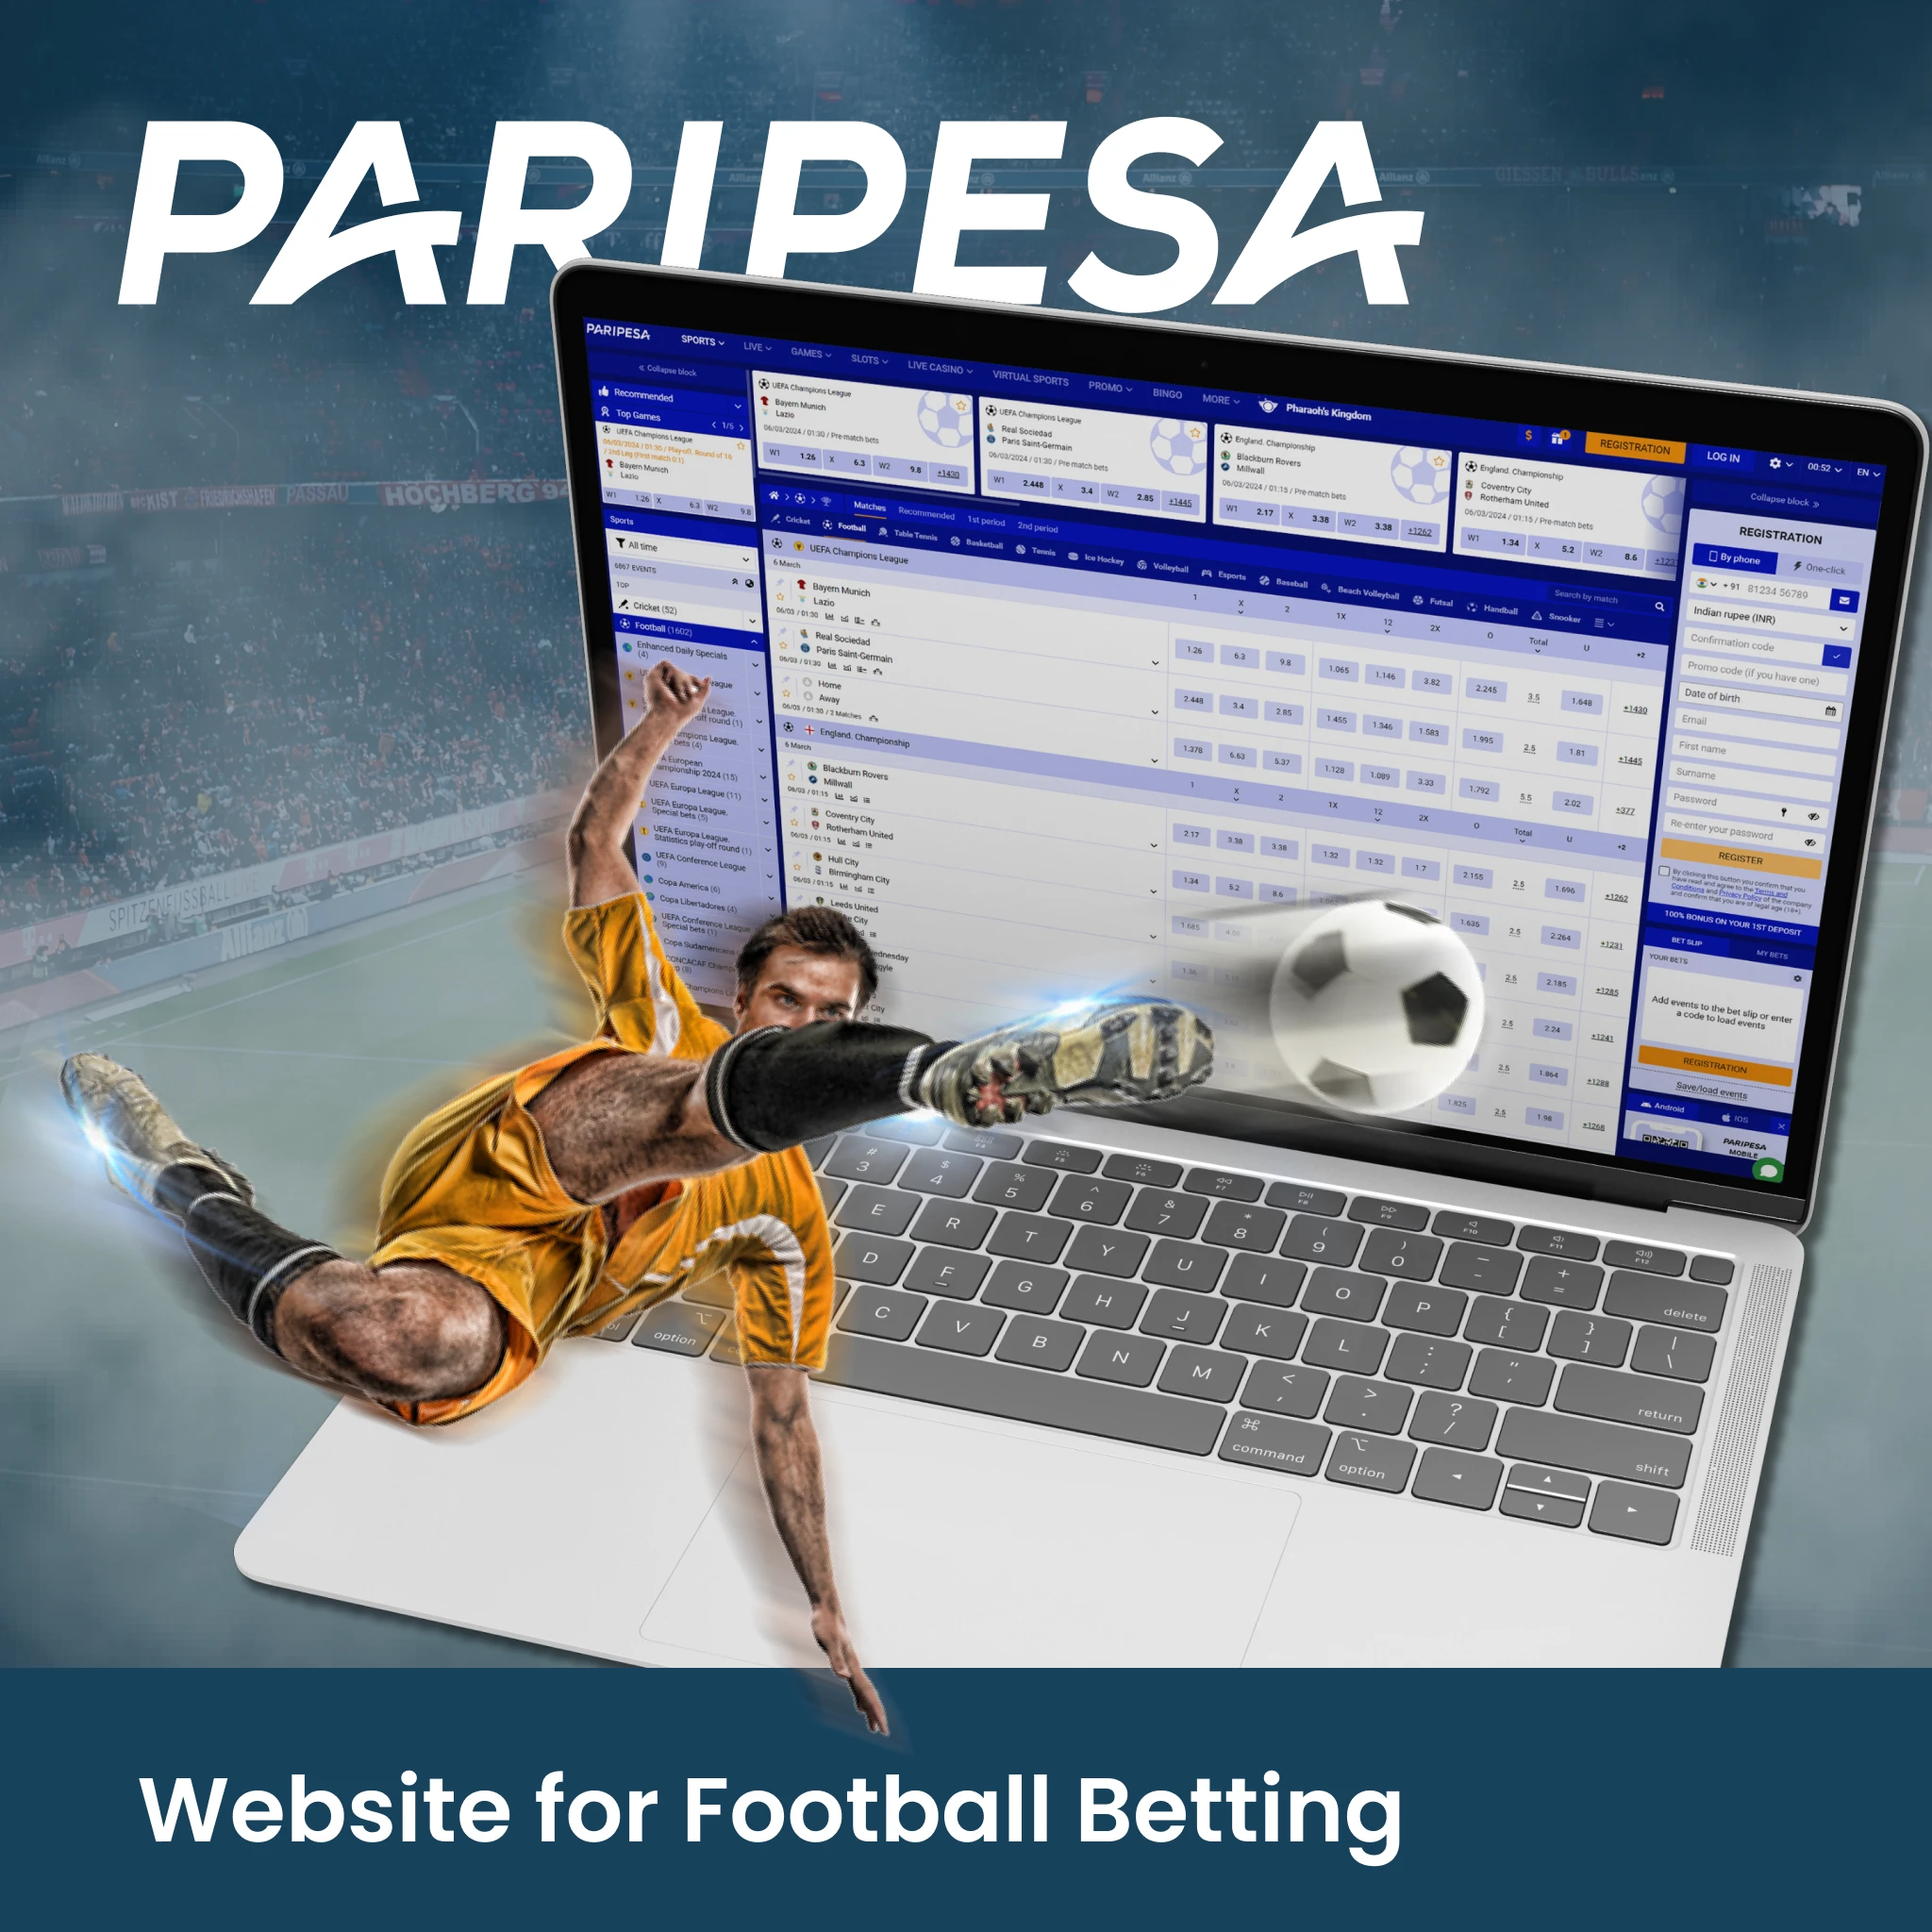 Paripesa offers a robust platform for betting, particularly appealing to football fans.